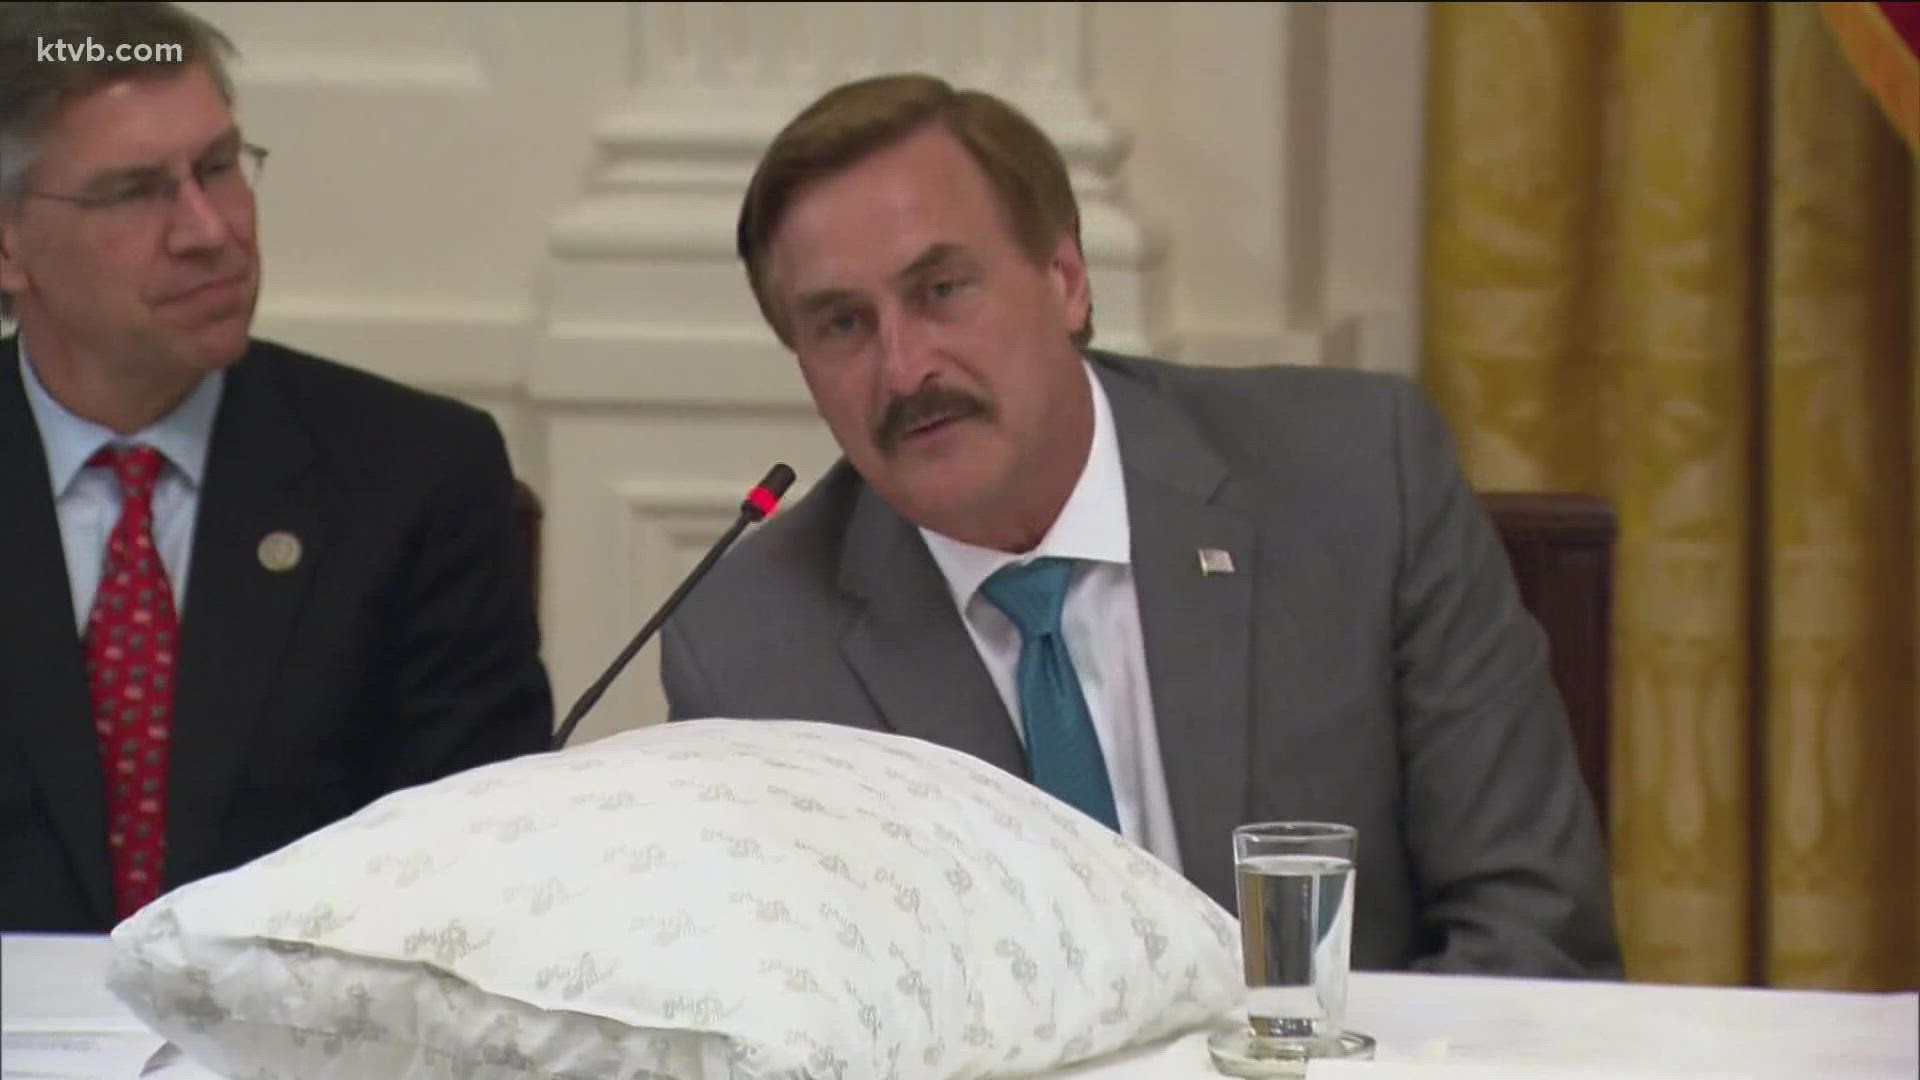 Idaho officials have sent Mike Lindell a cease-and-desist letter and a bill of more than $6,000 over his repeated accusations of voter fraud in the state.